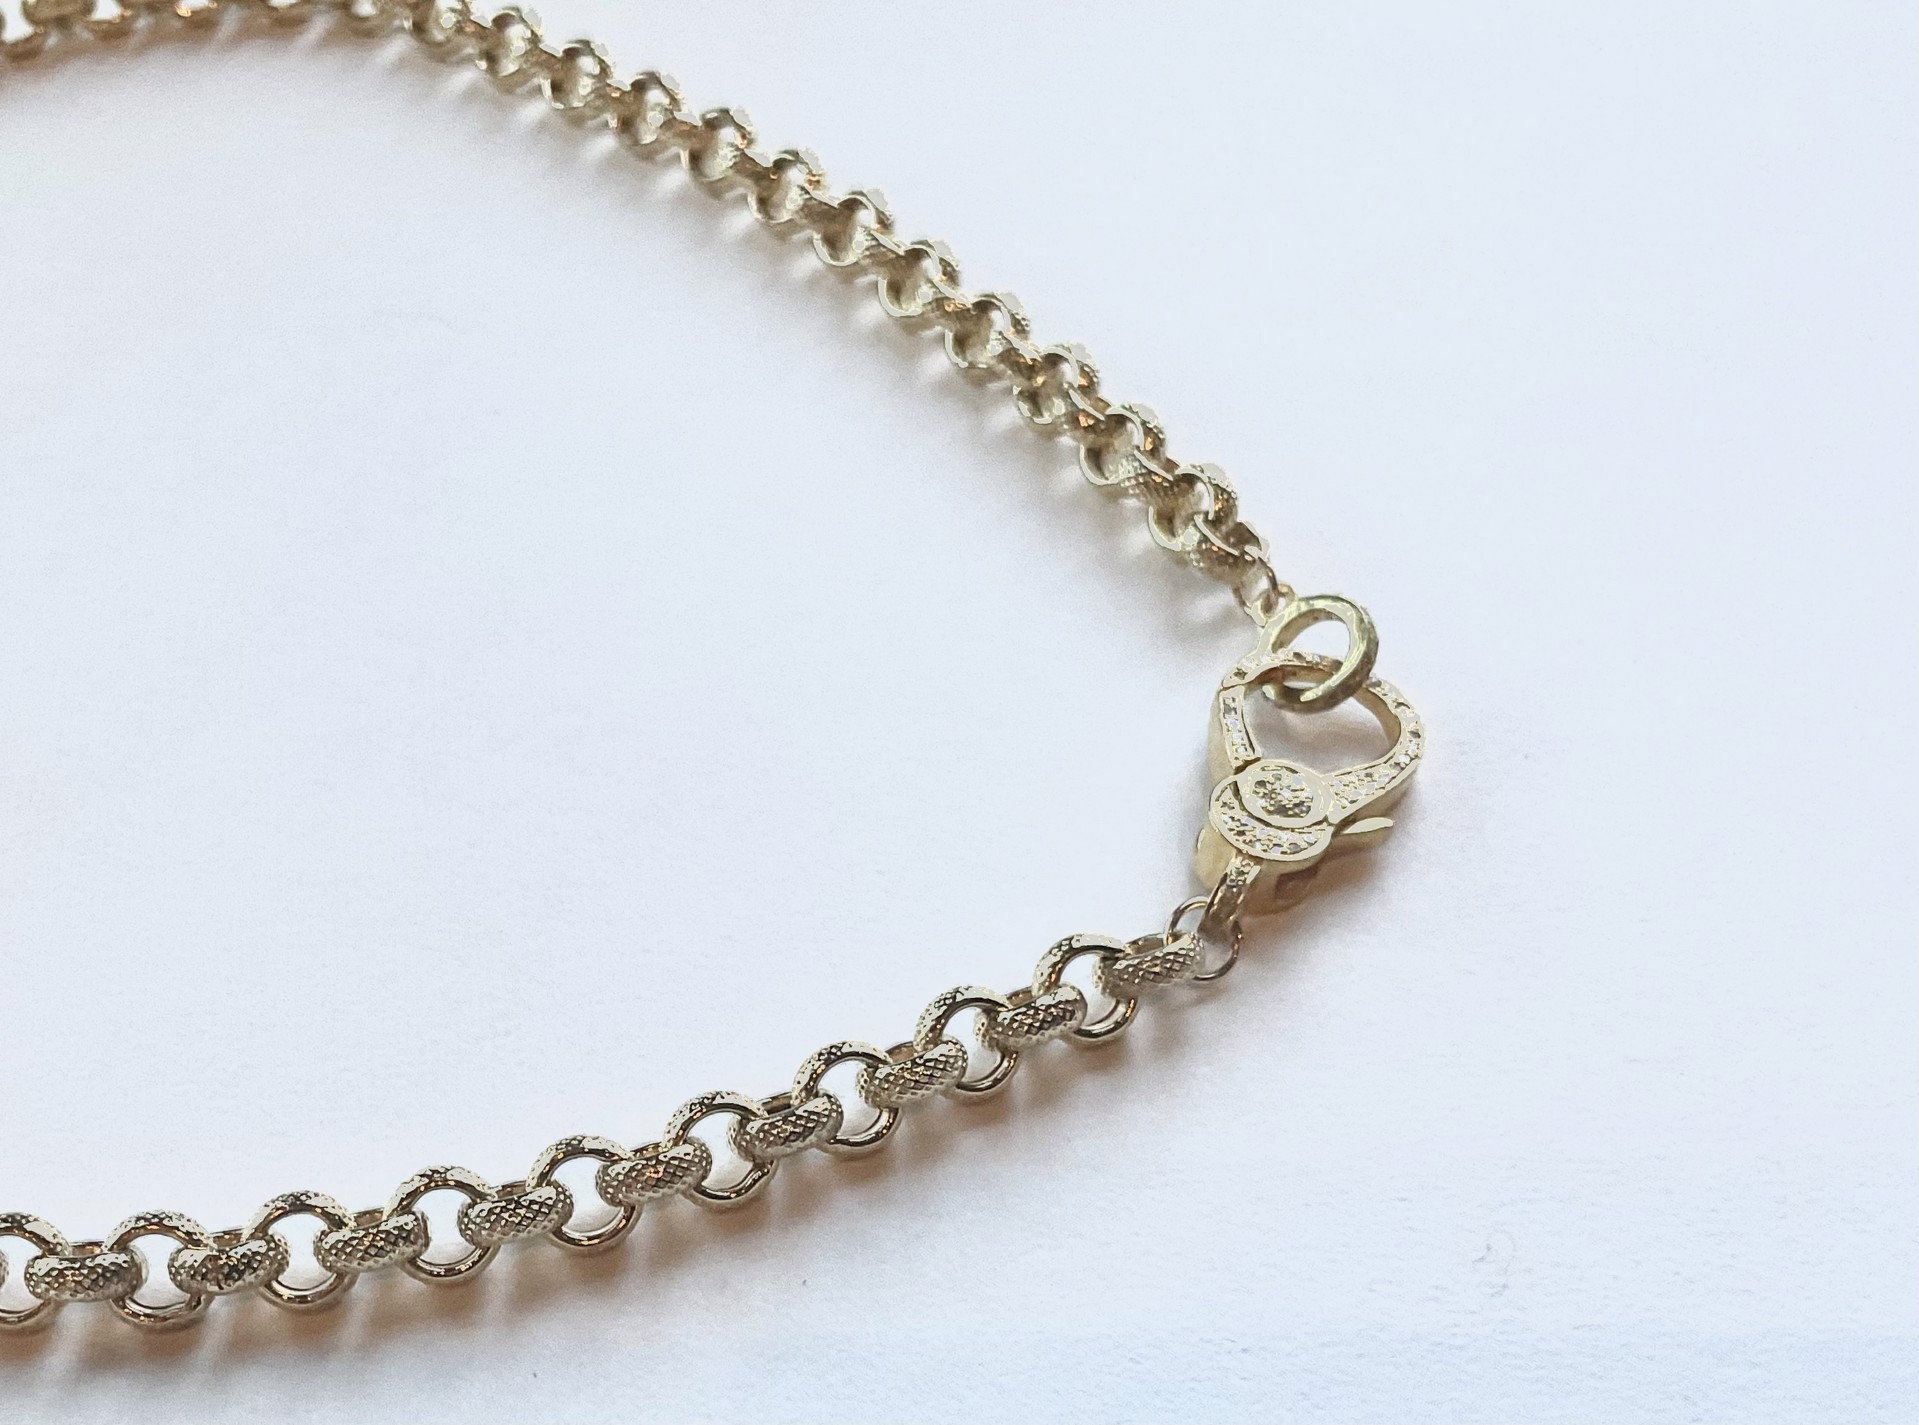 KB-N77 GVML Rolo Chain with Pave Diamond Clasp by Karen Birchmier